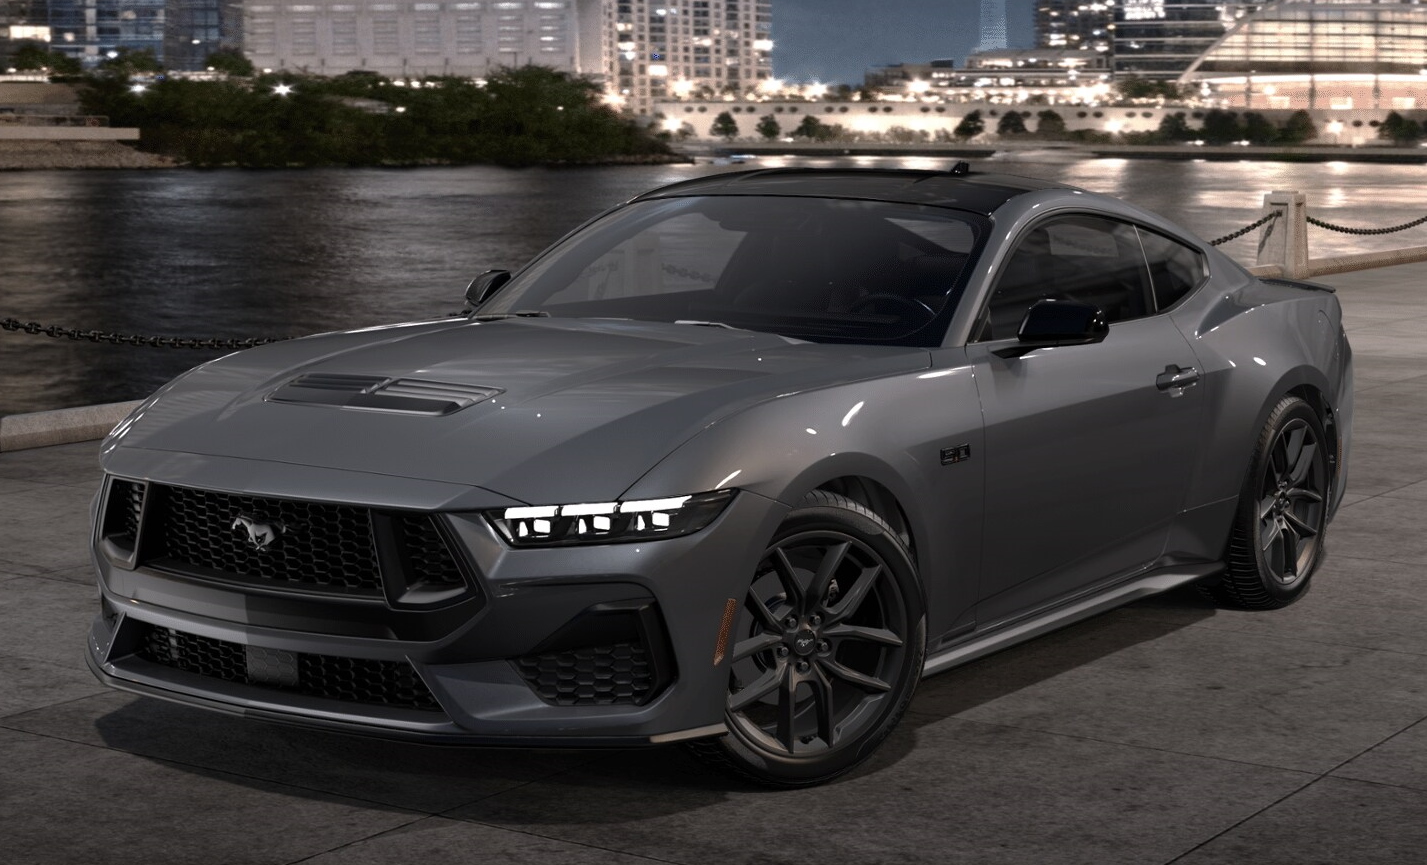 S650 Mustang 2024 Mustang Build & Price Configurator UPDATED!! [New Images] vehicle